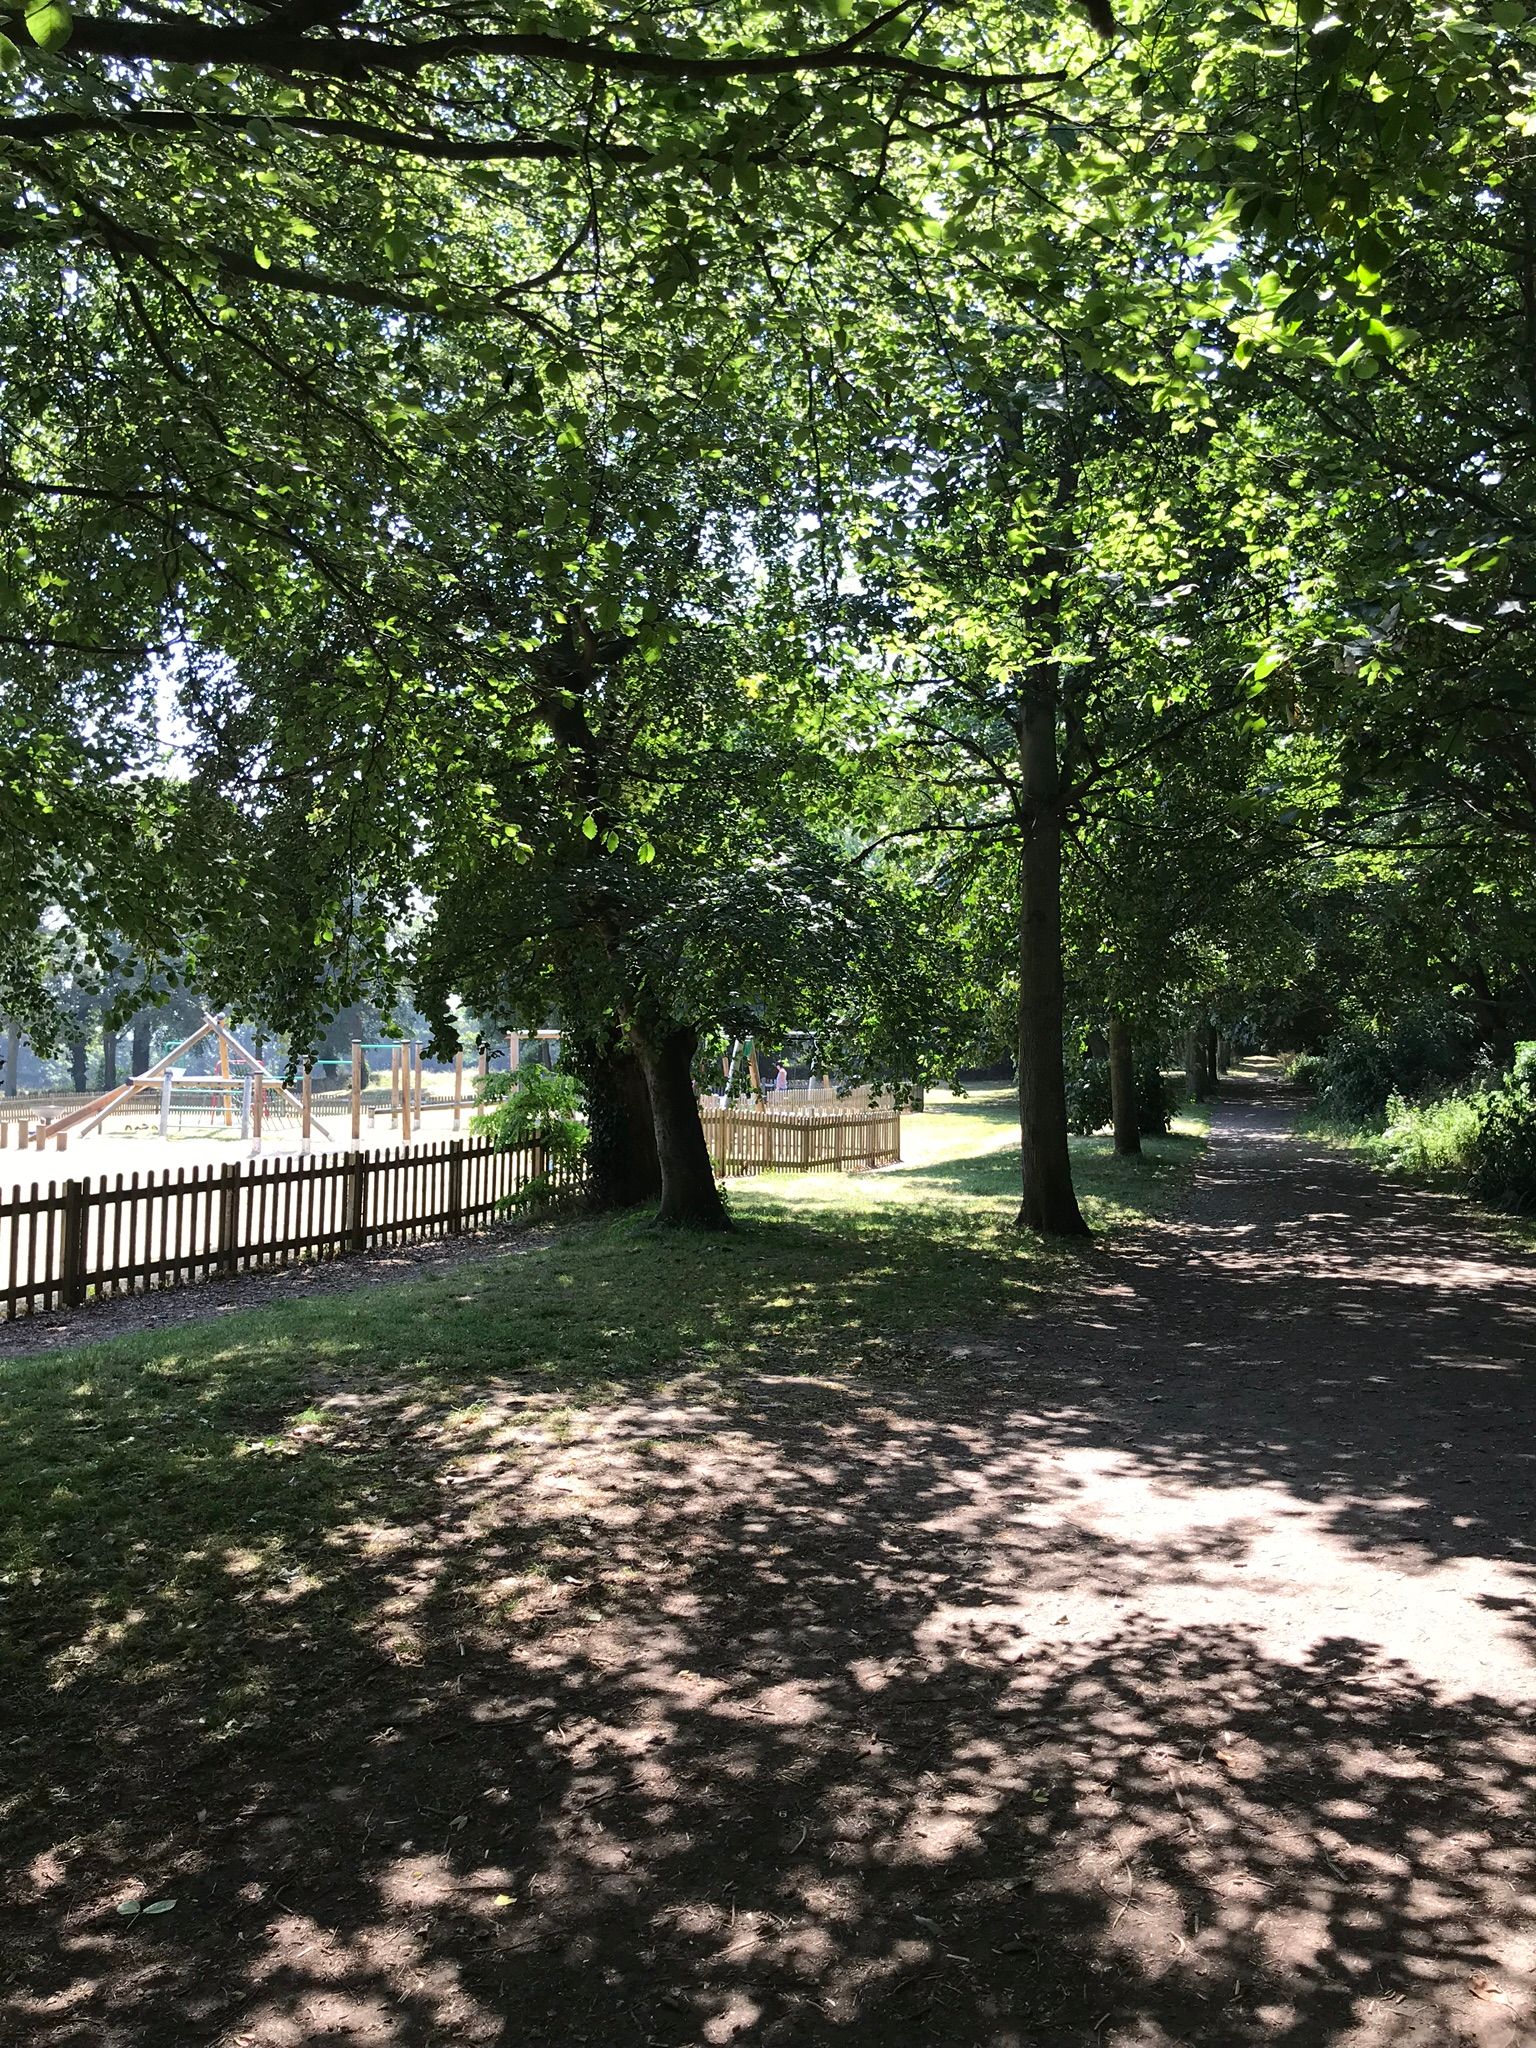 Shady walkway through the trees towards the children's play area at King George VI Memorial Park